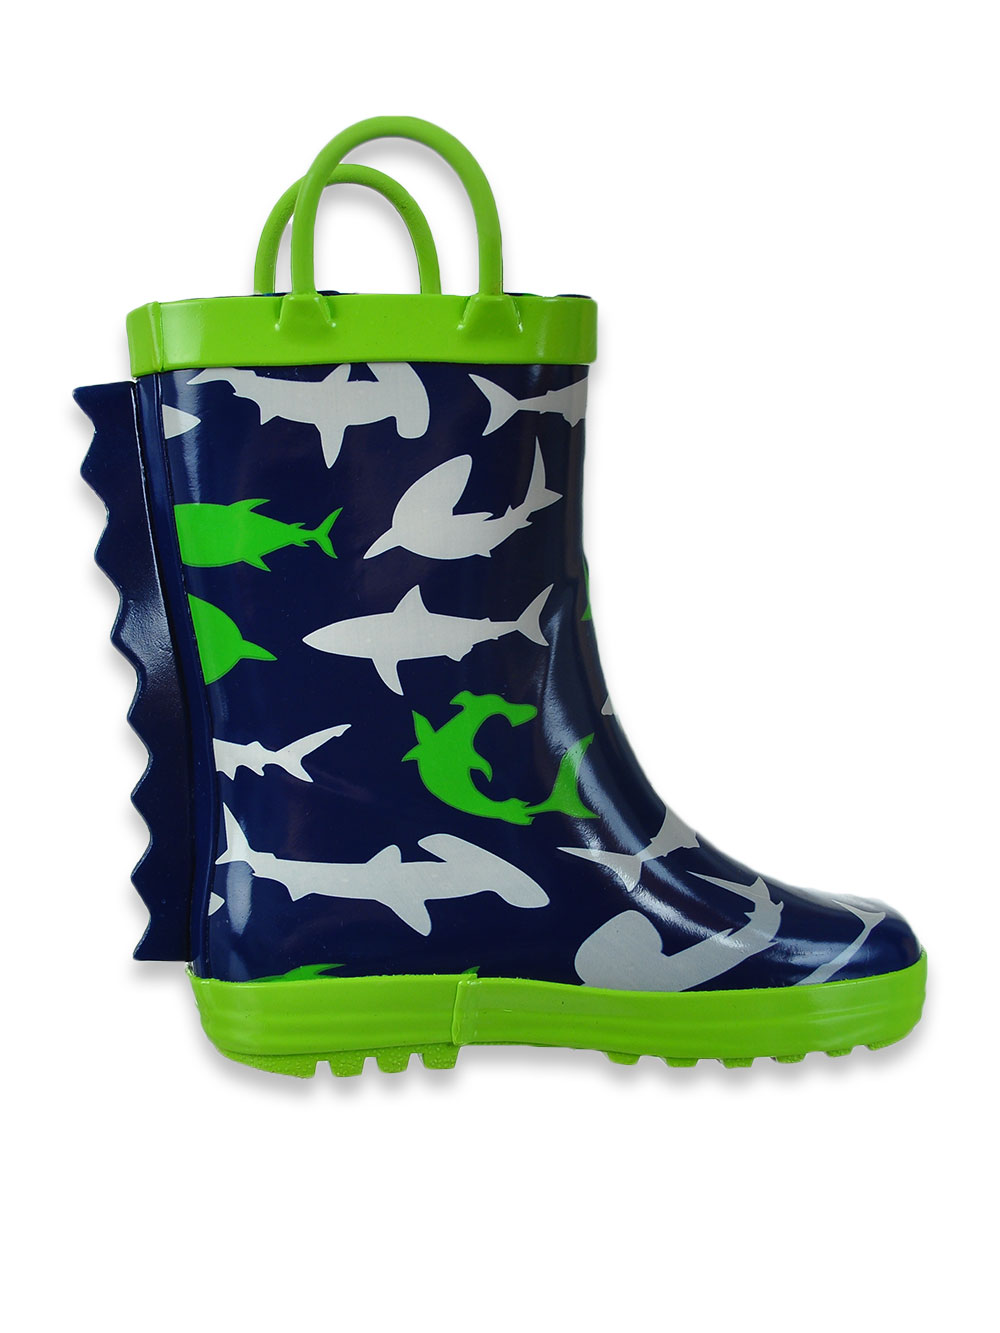 Lilly of New York Kids Boys and Girls Waterproof Rubber Rainboot with Handles Toddler and Little Kid 